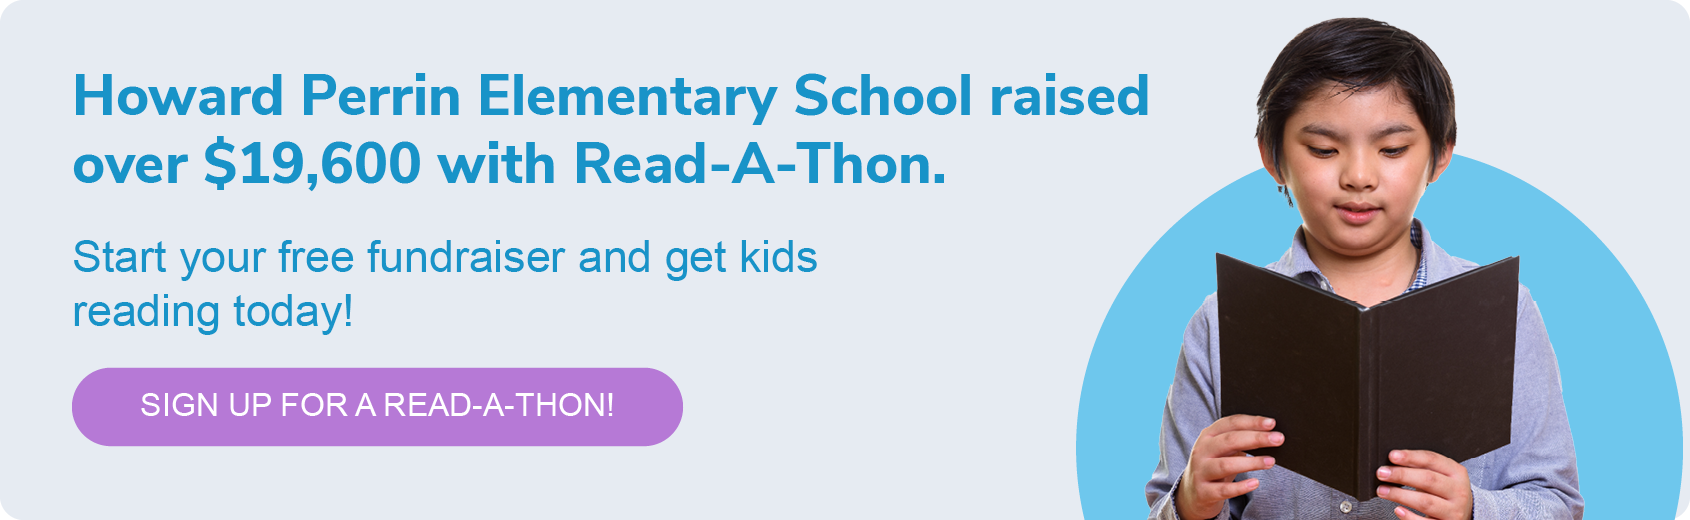 Click through to sign up for a free Read-A-Thon fundraiser and start raising thousands of dollars to meet your online school fundraising goals.